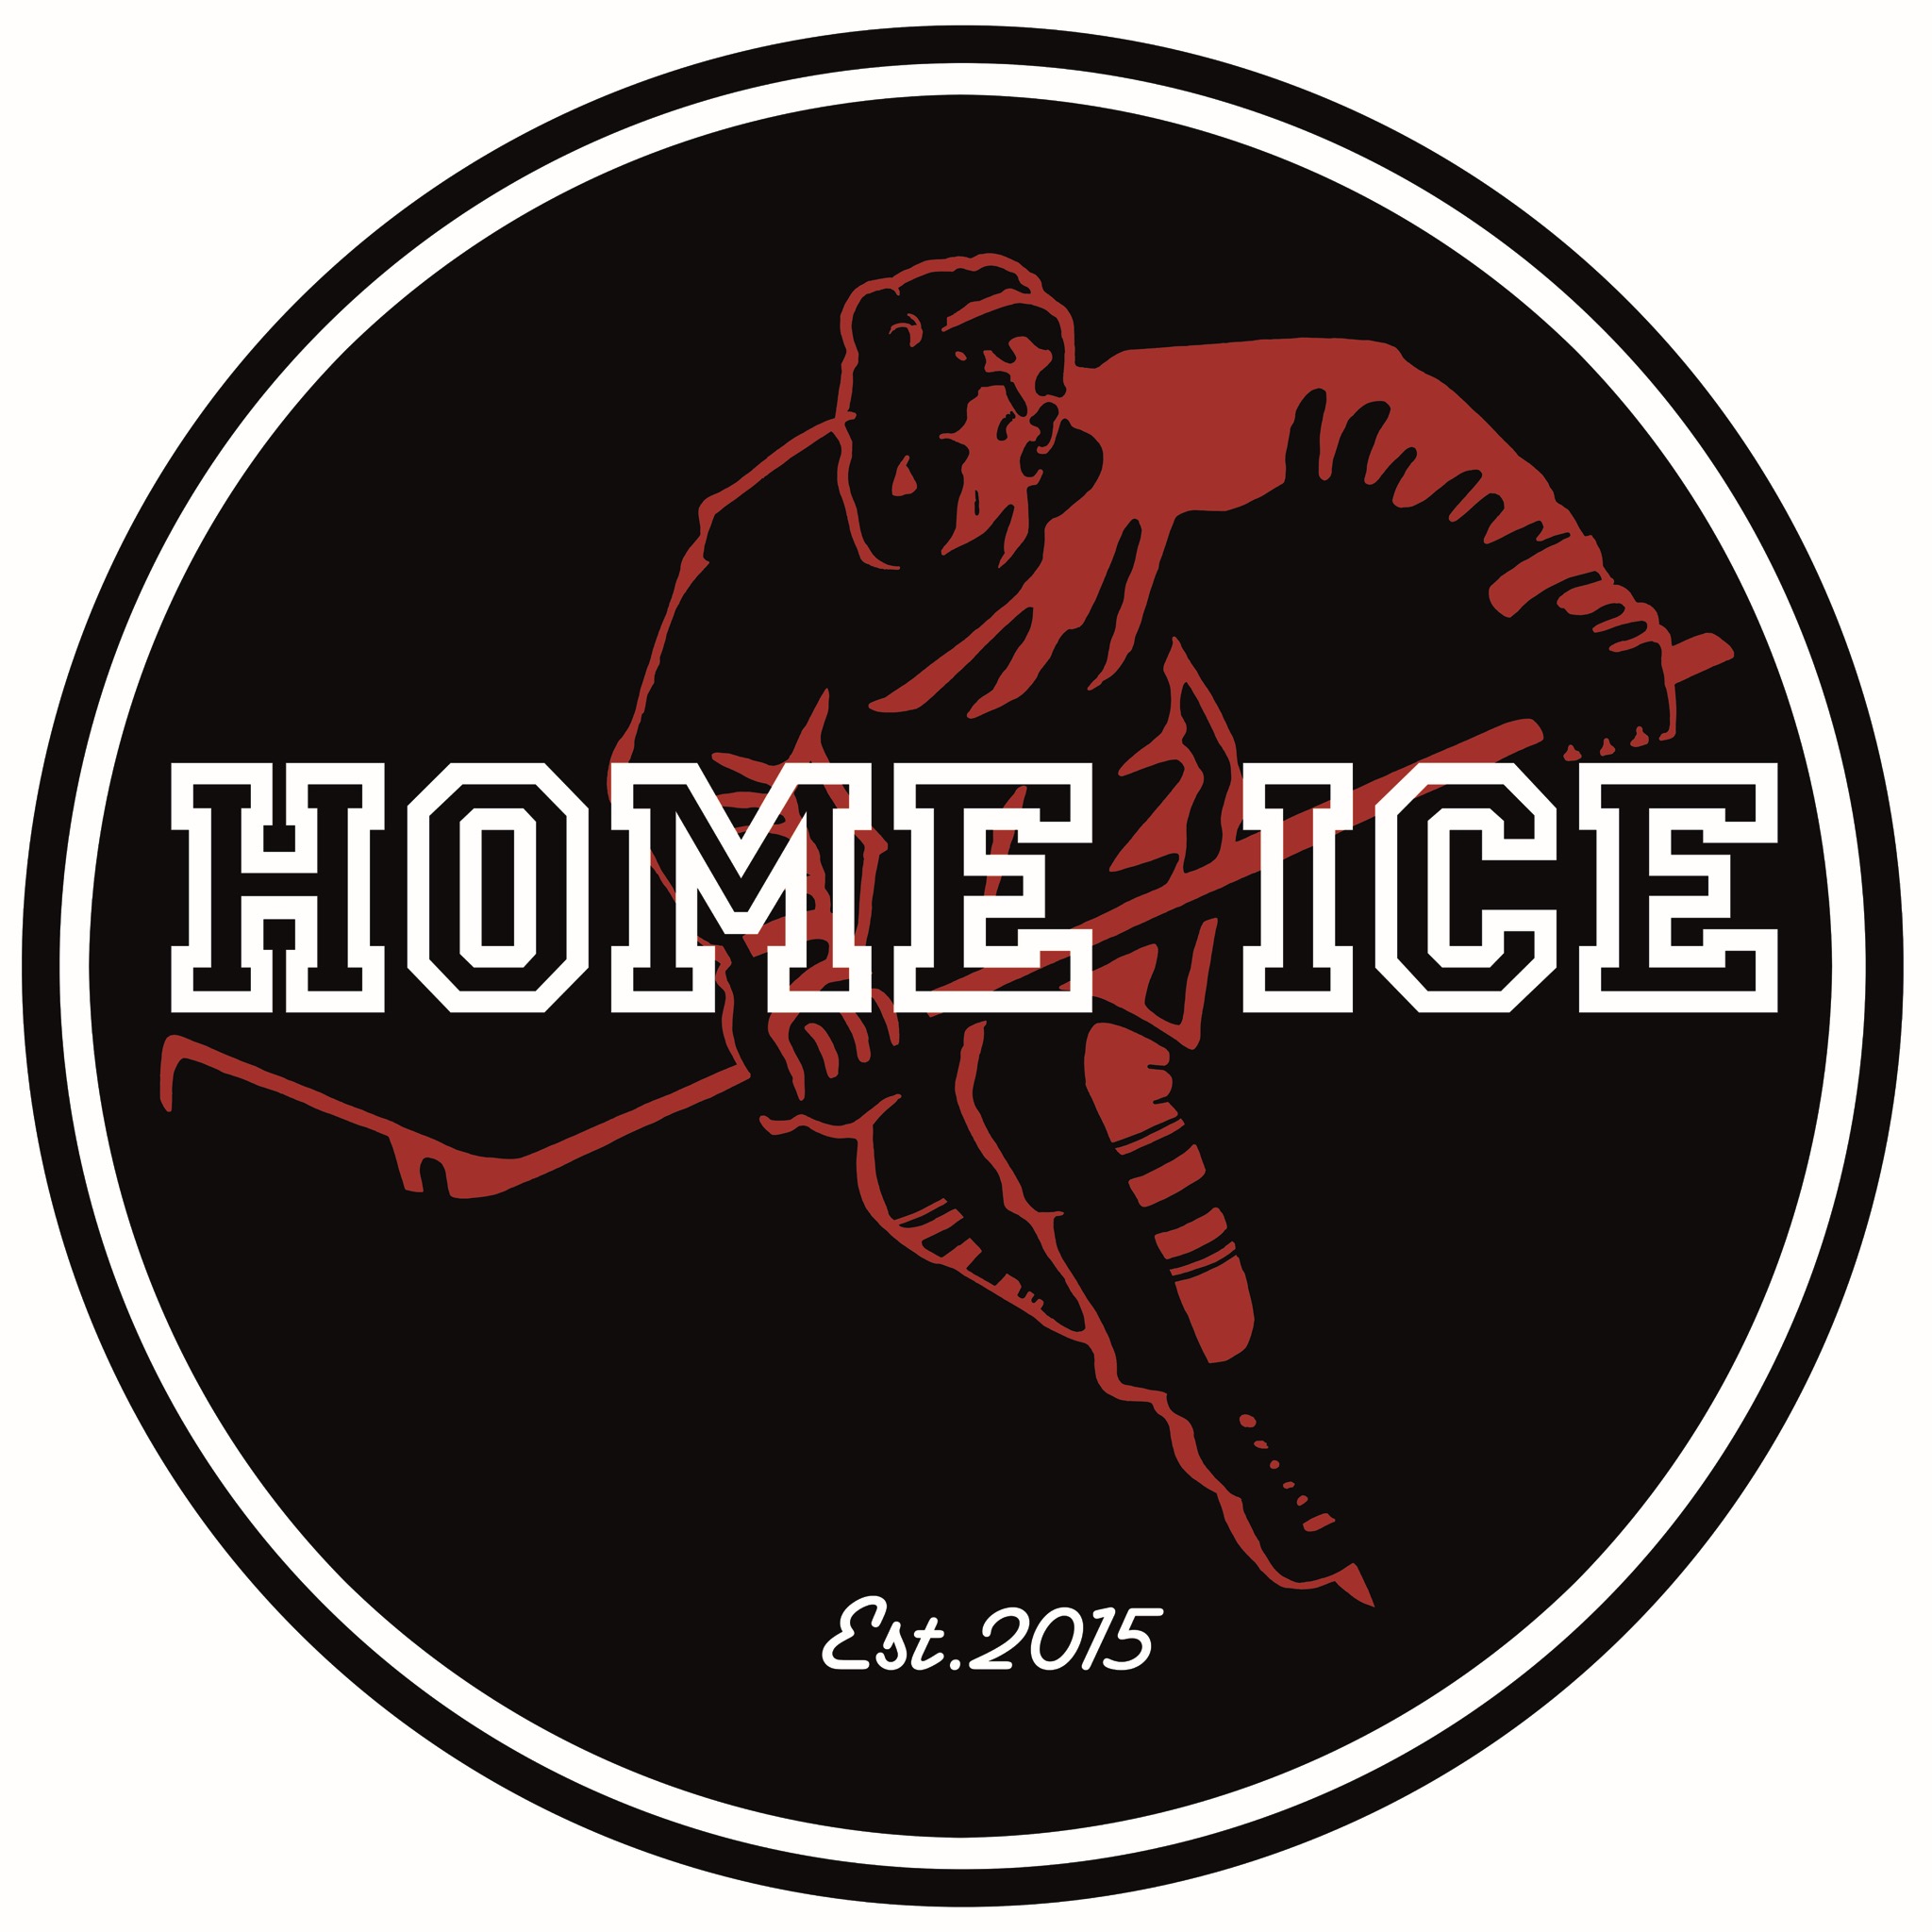 Home Ice Chicago - Hockey Supplies